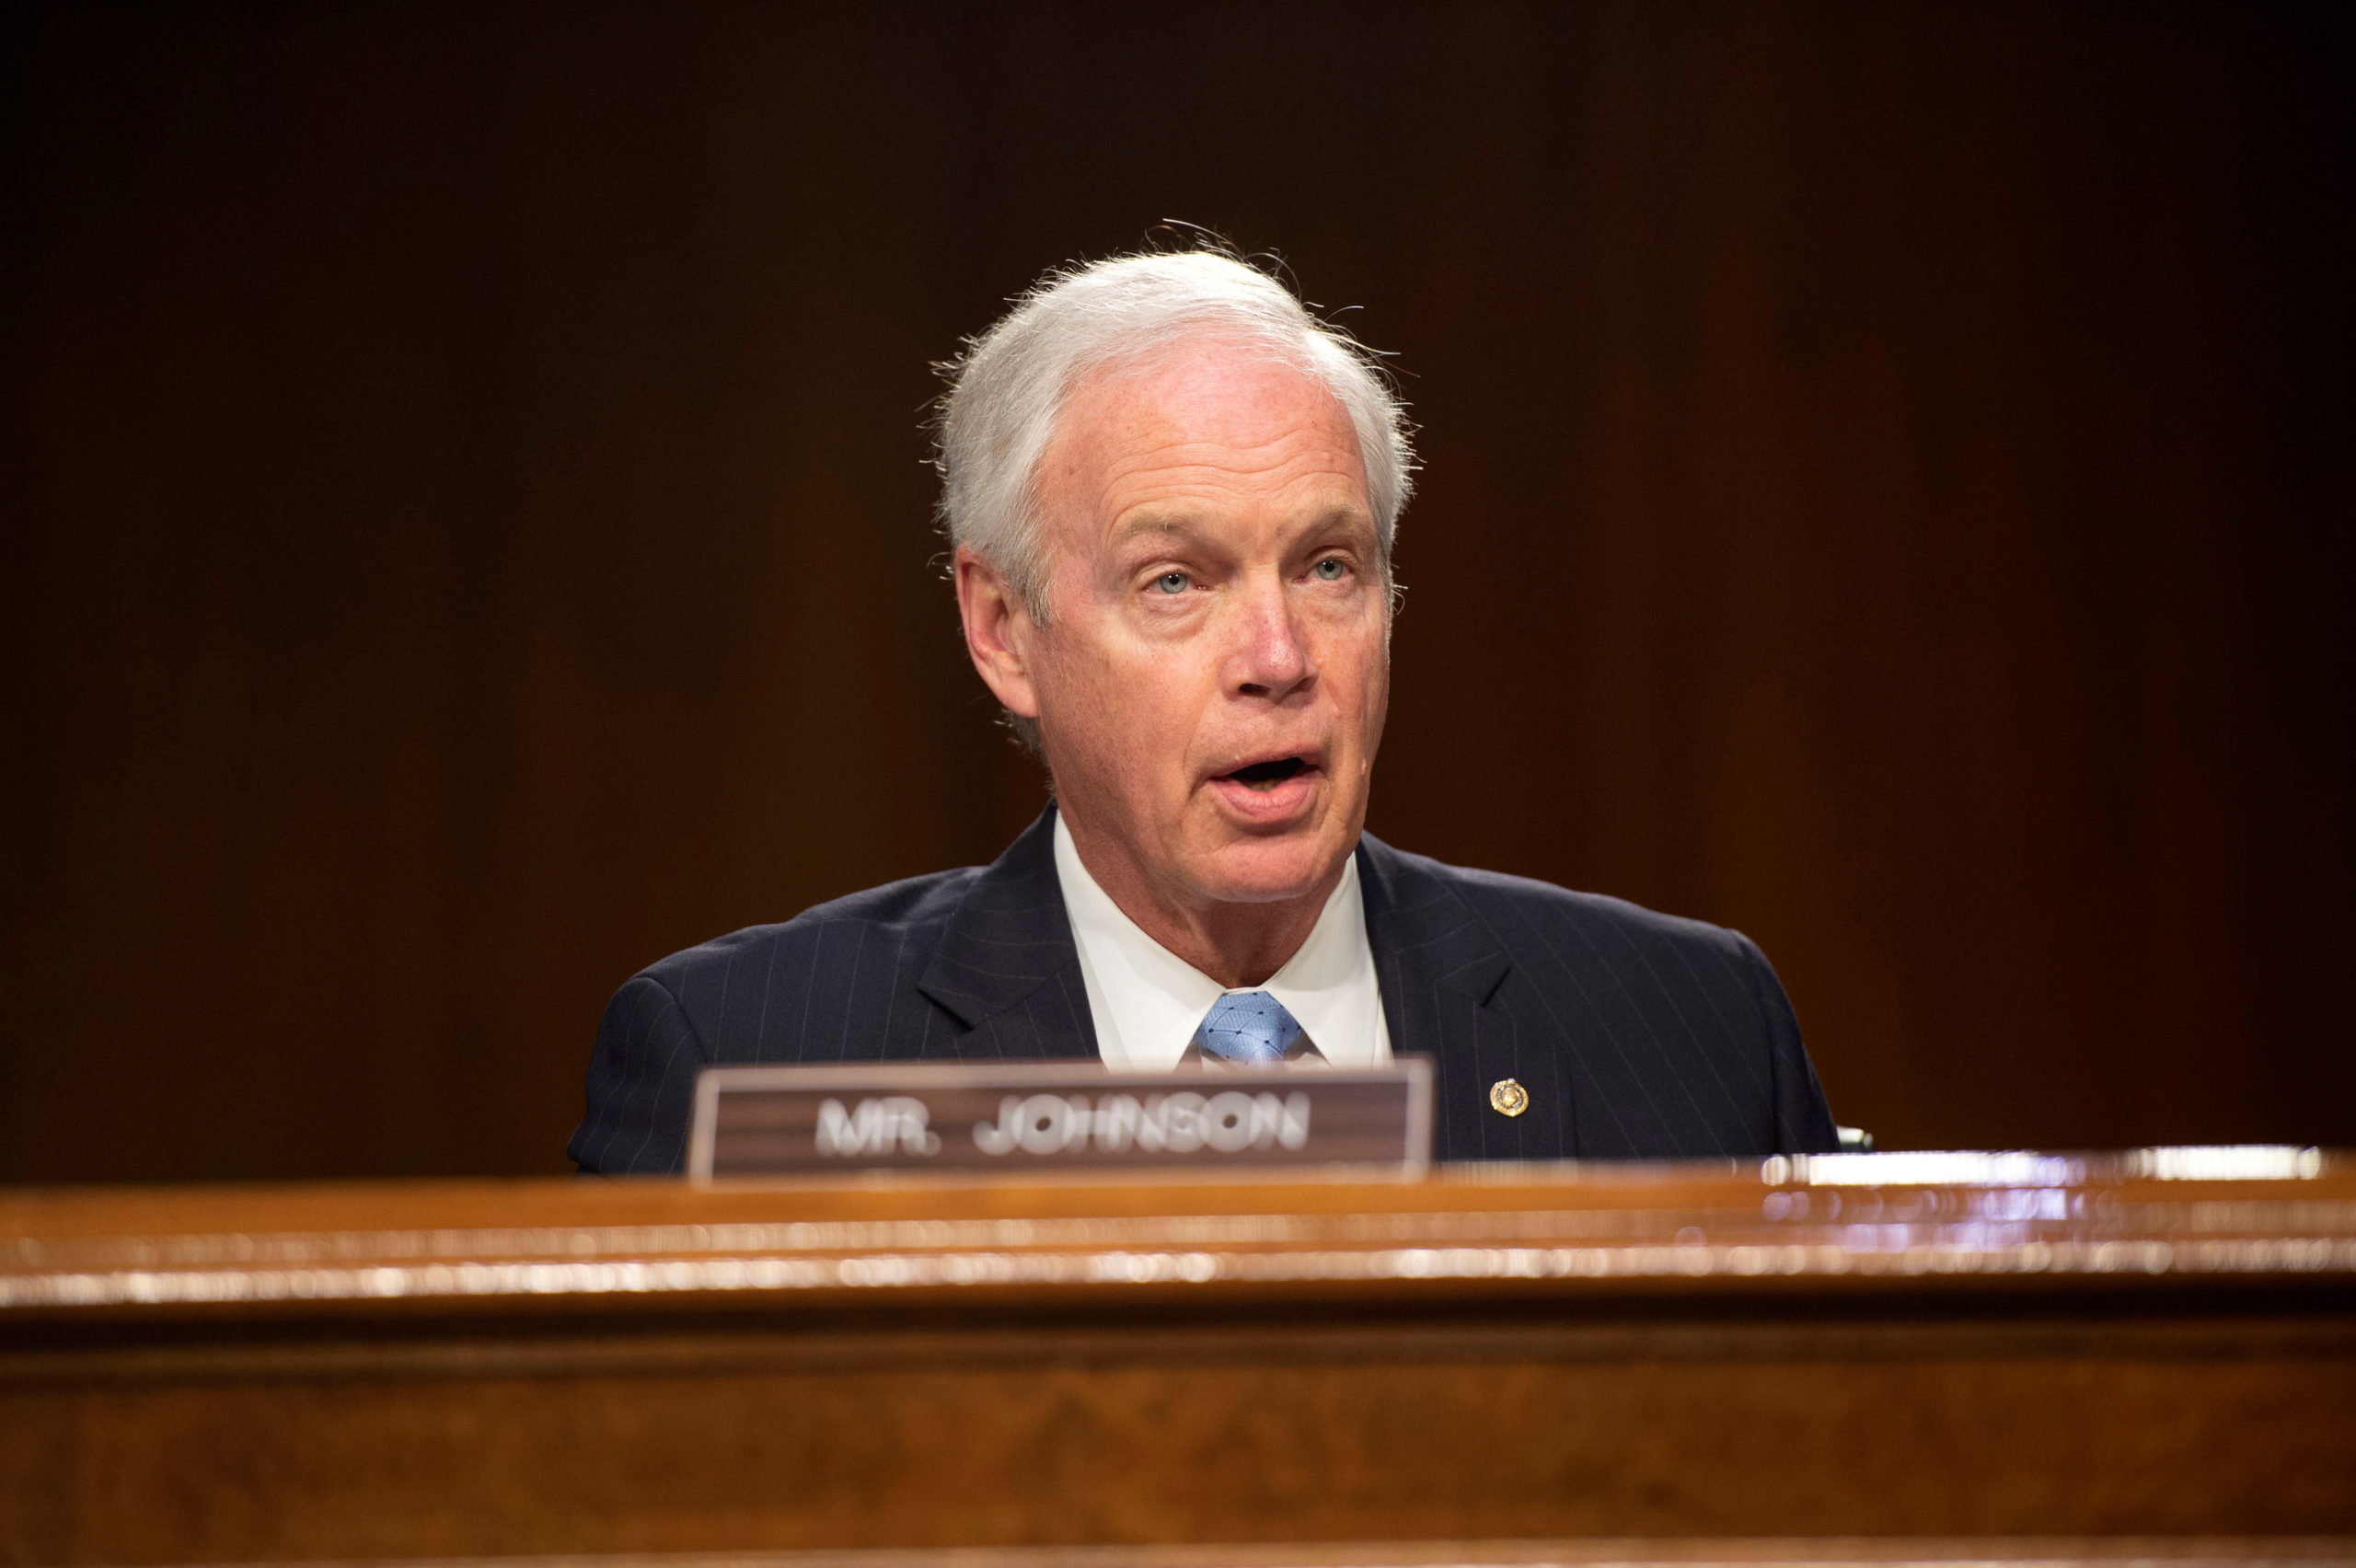 Senator Ron Johnson (R-WI) speaks during a Senate Foreign Relations Committee hearing on the Fiscal Year 2023 Budget at the U.S. Capitol in Washington, U.S., April 26, 2022. Bonnie Cash/Pool via REUTERS